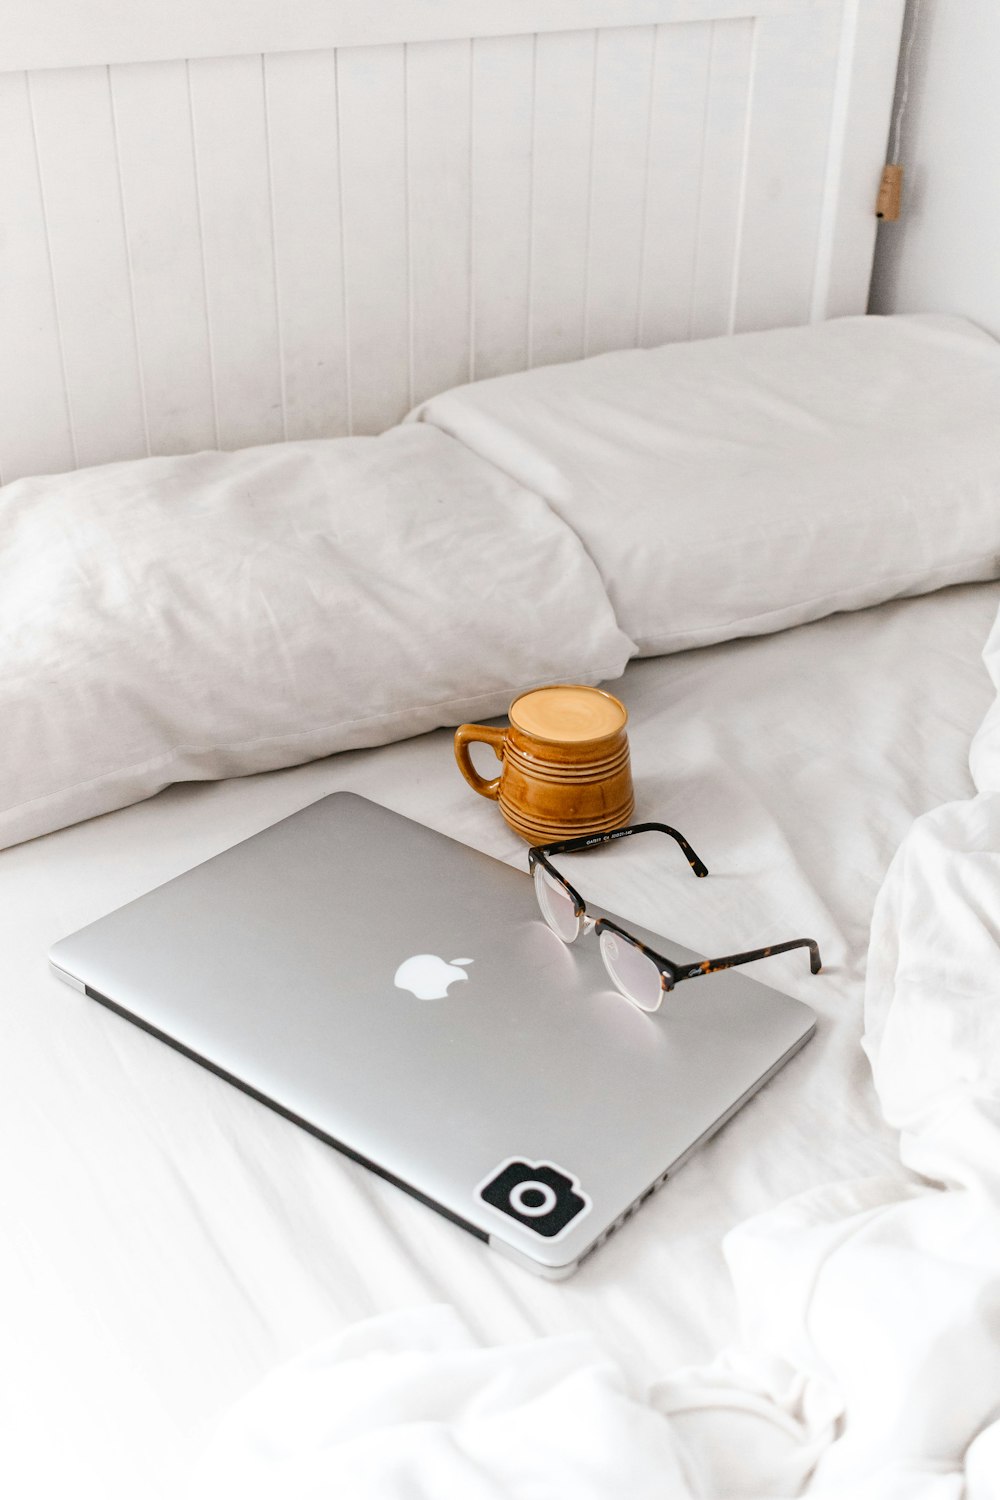 macbook air on white bed